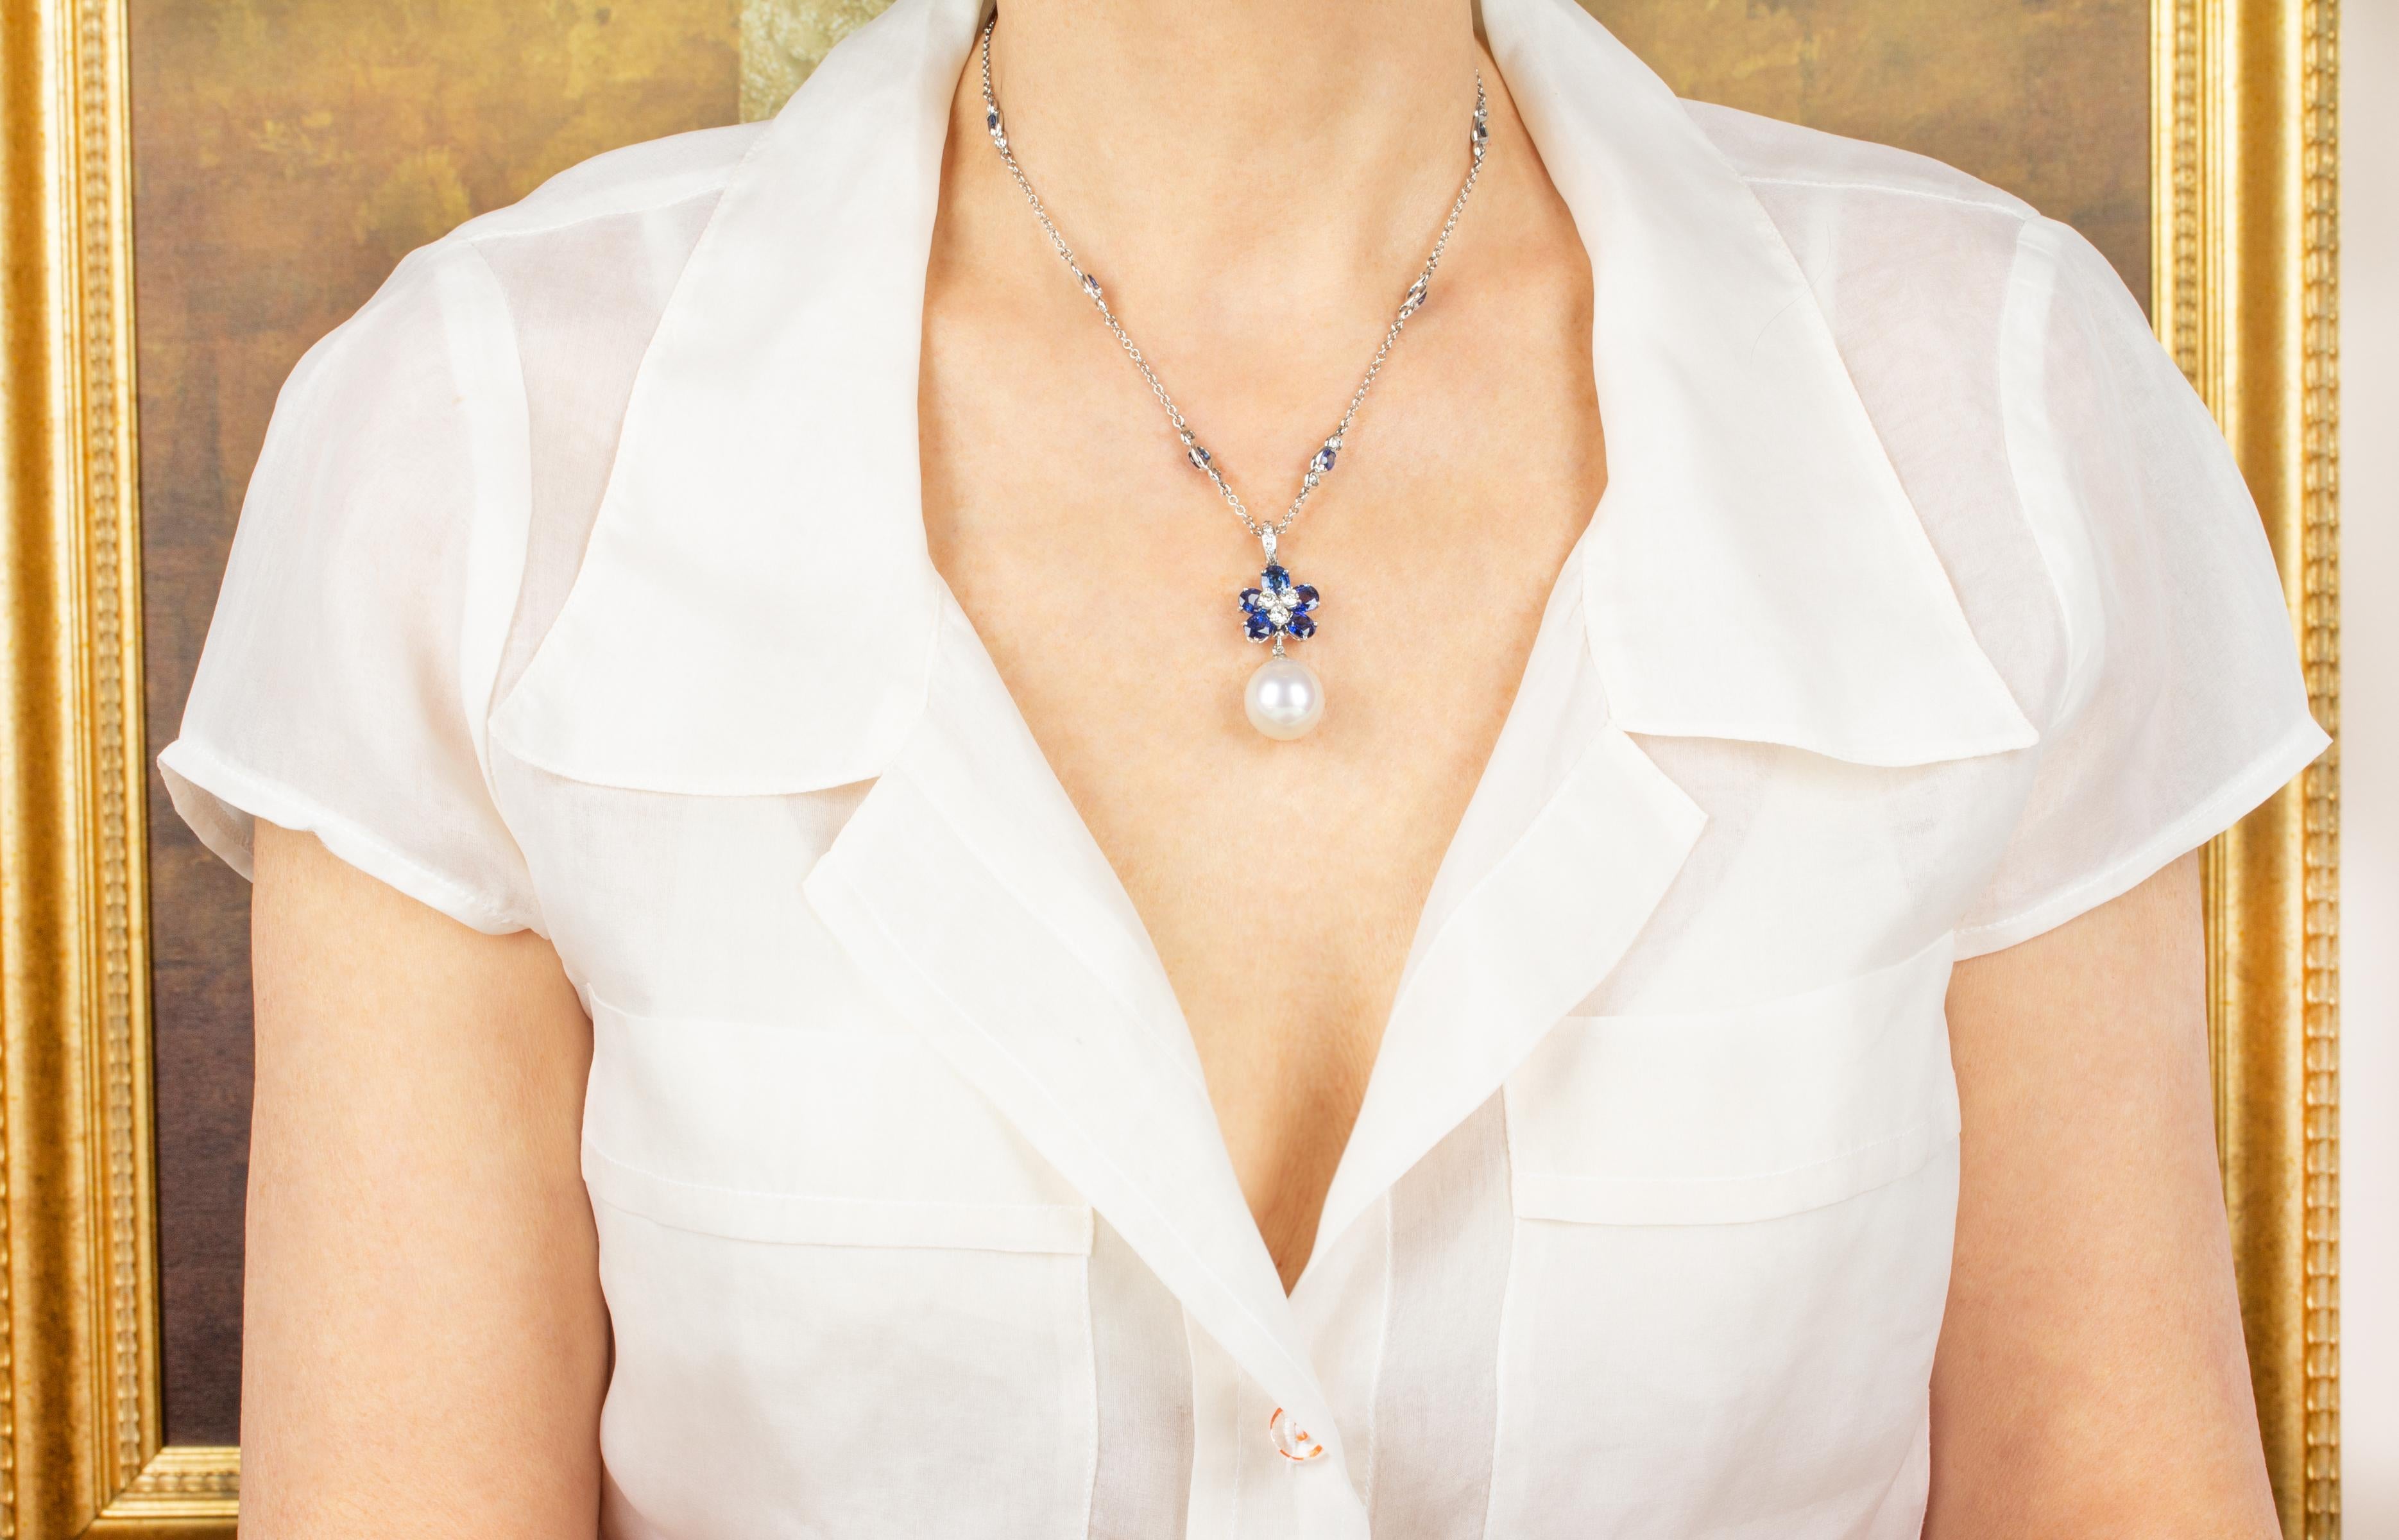 The blue Ceylon sapphire pendant necklace features 5 faceted blue oval cut sapphires with a diamond center suspending a 16 x 17mm South Sea pearl. The 1.75” pendant is accompanied by a 16” 18 carat gold chain decorated with 8 blue sapphire motifs